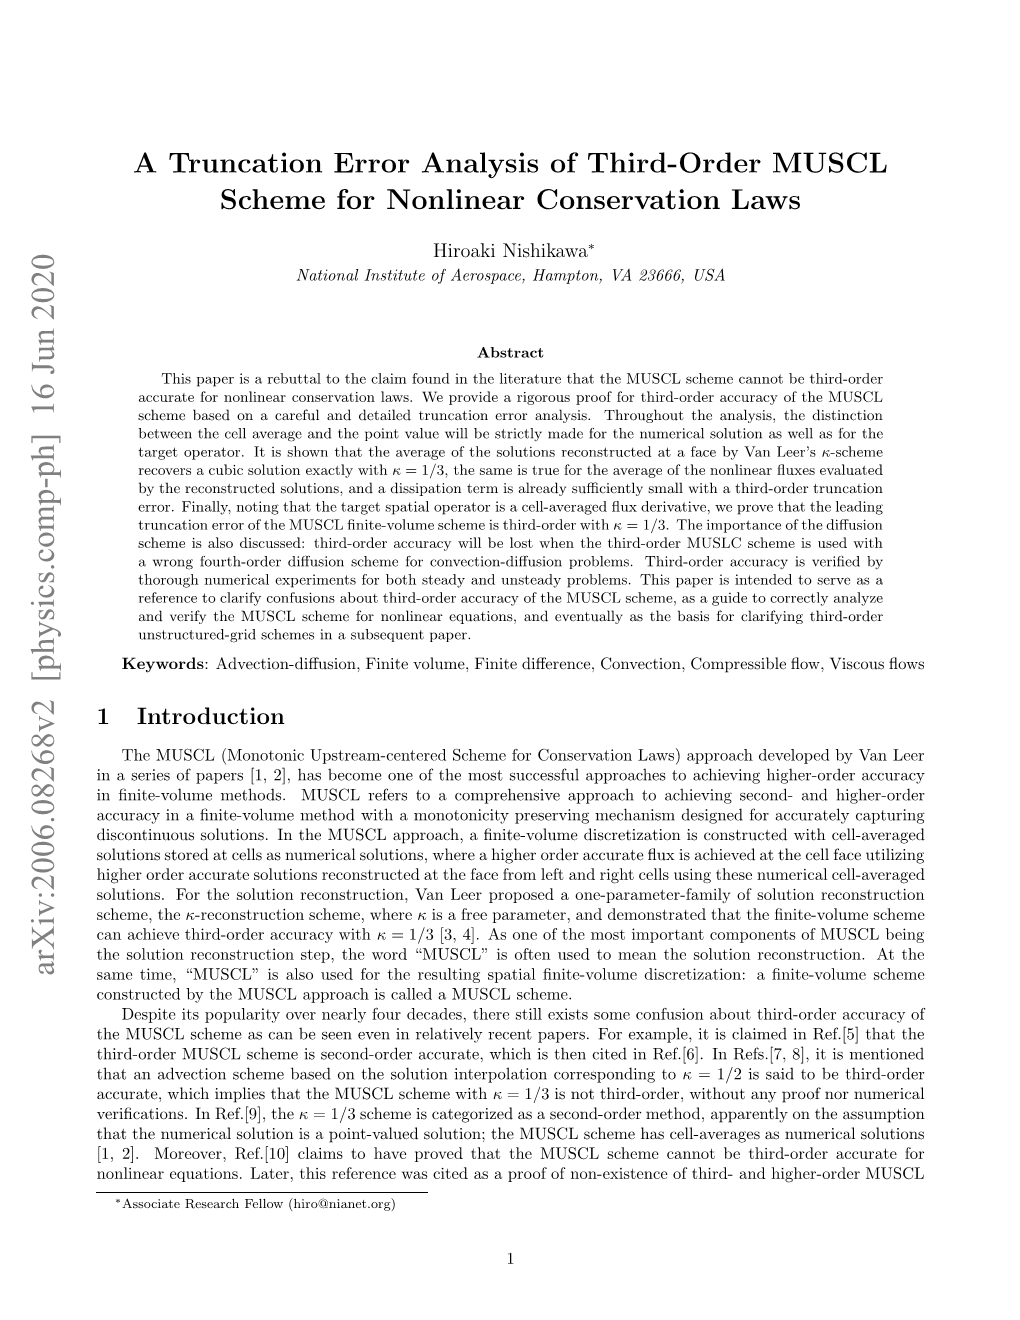 A Truncation Error Analysis of Third-Order MUSCL Scheme for Nonlinear Conservation Laws